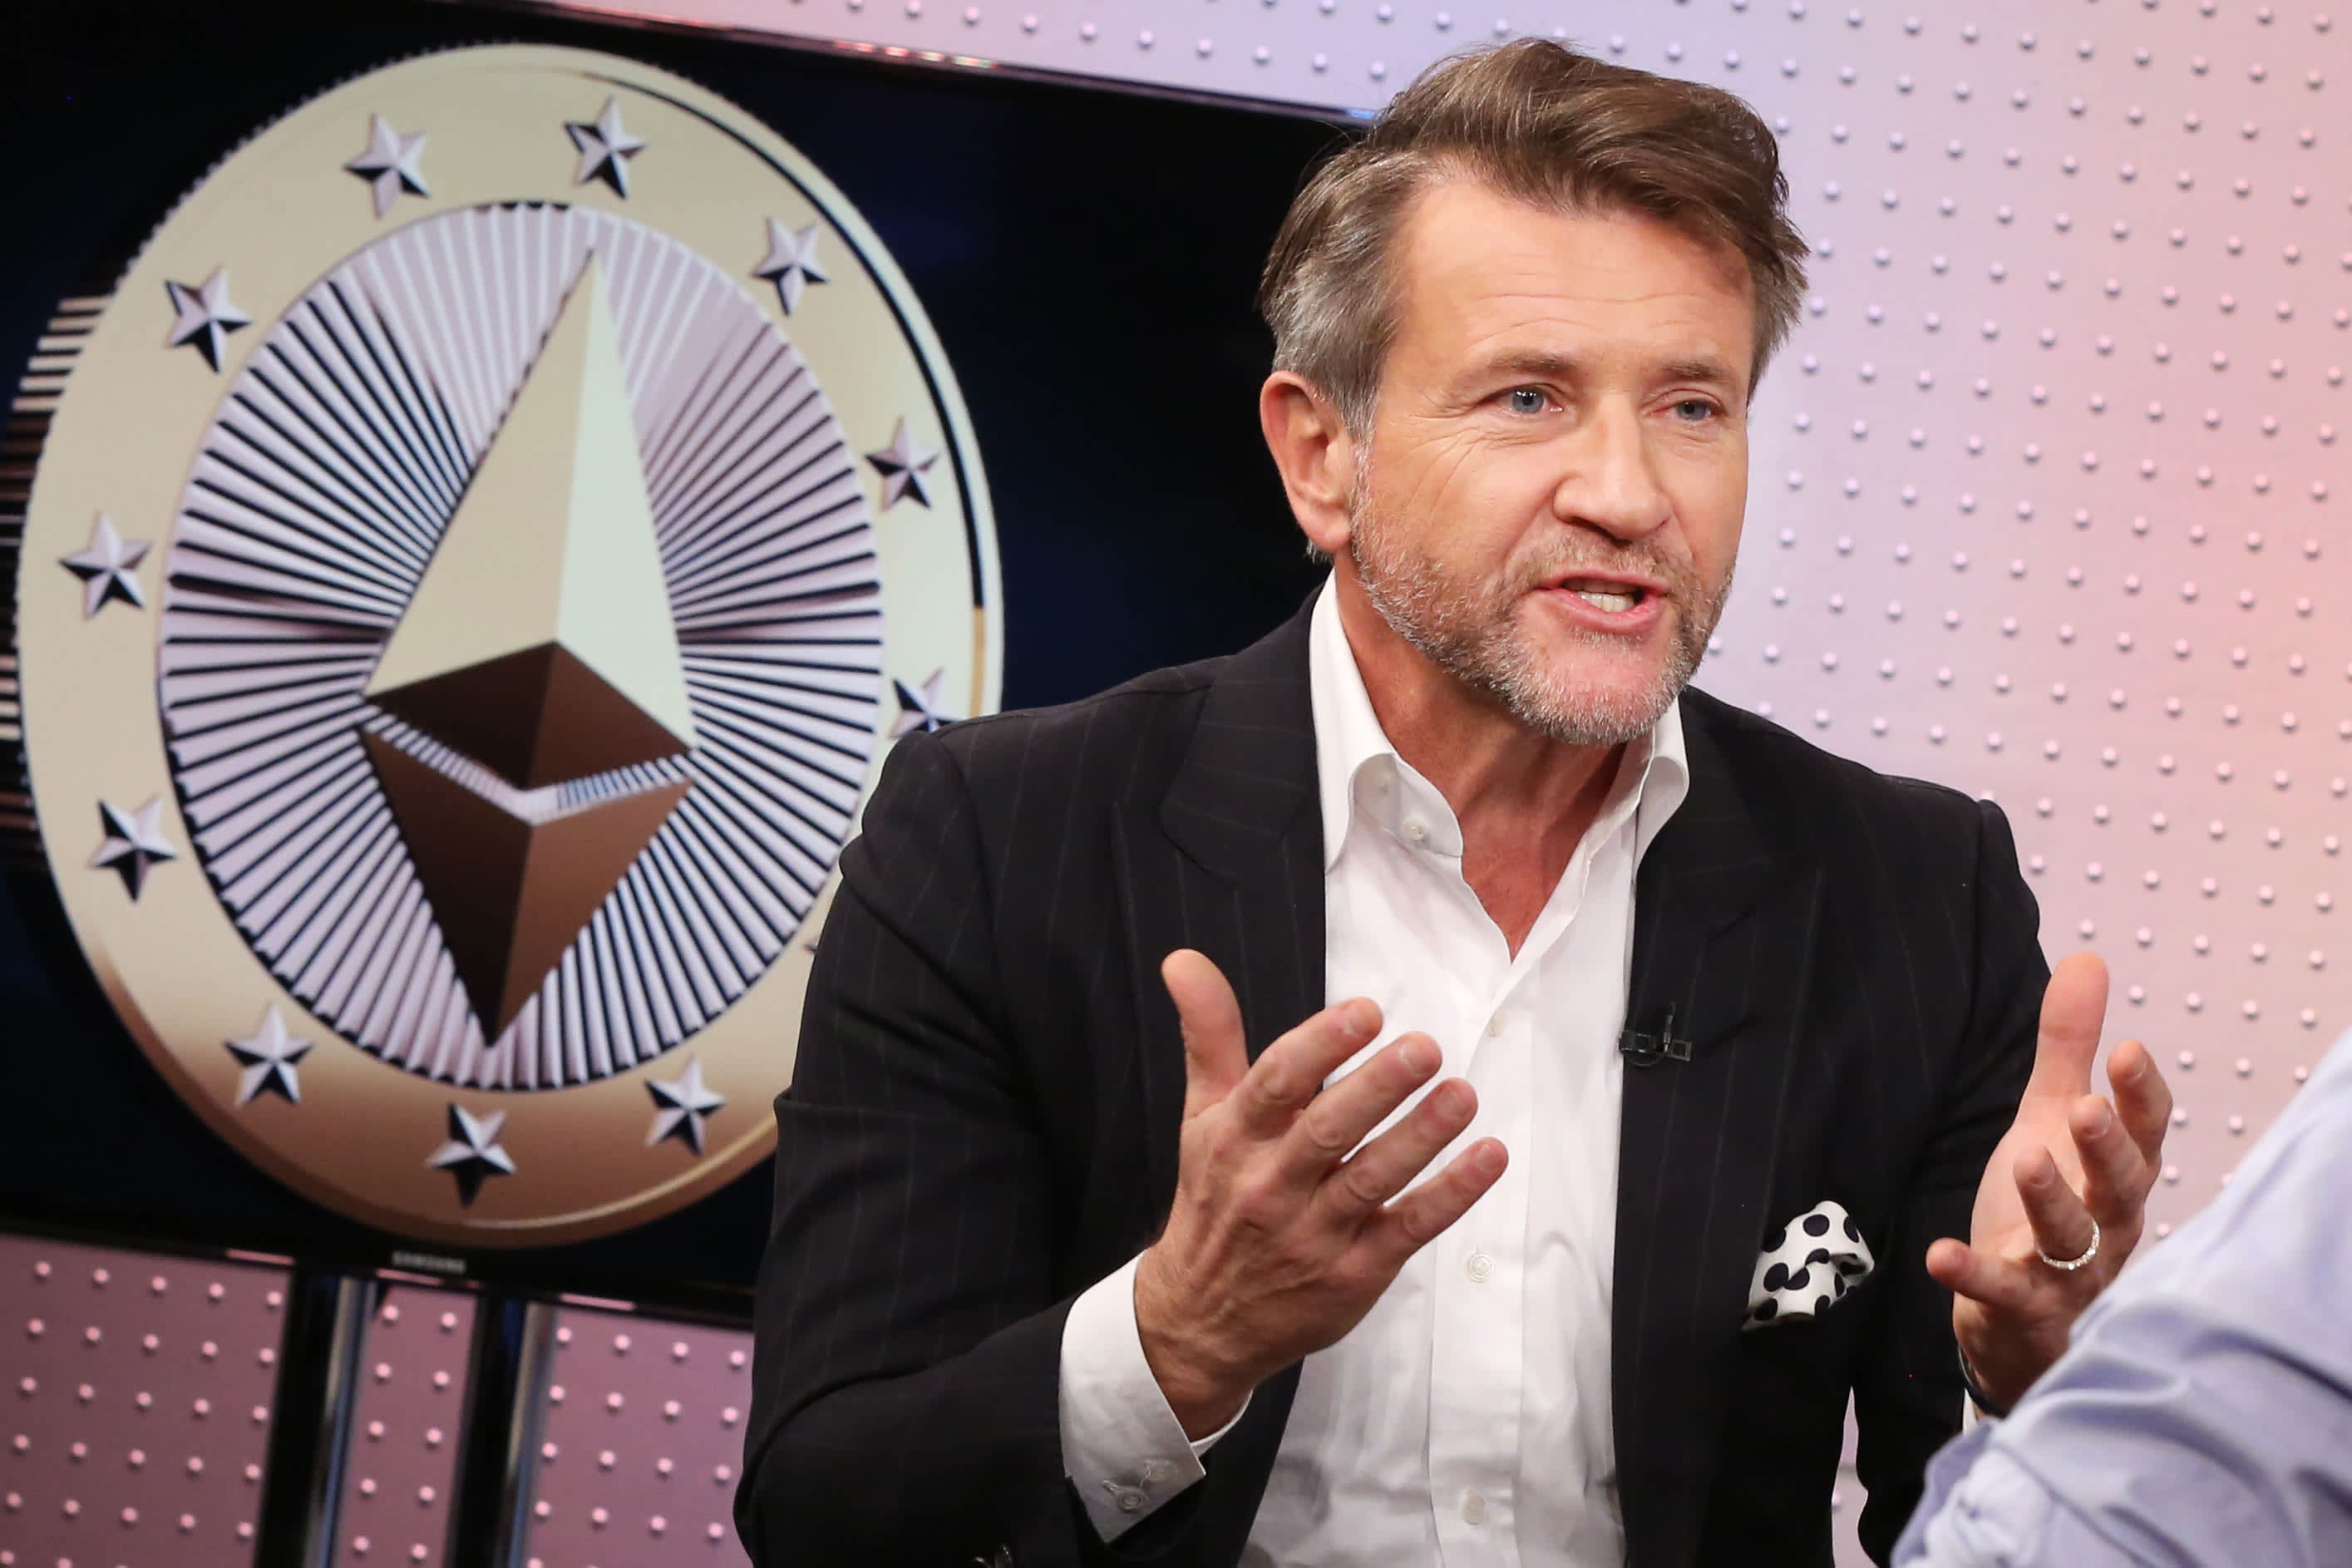 Robert Herjavec on the high profile Twitter hack and cybersecurity